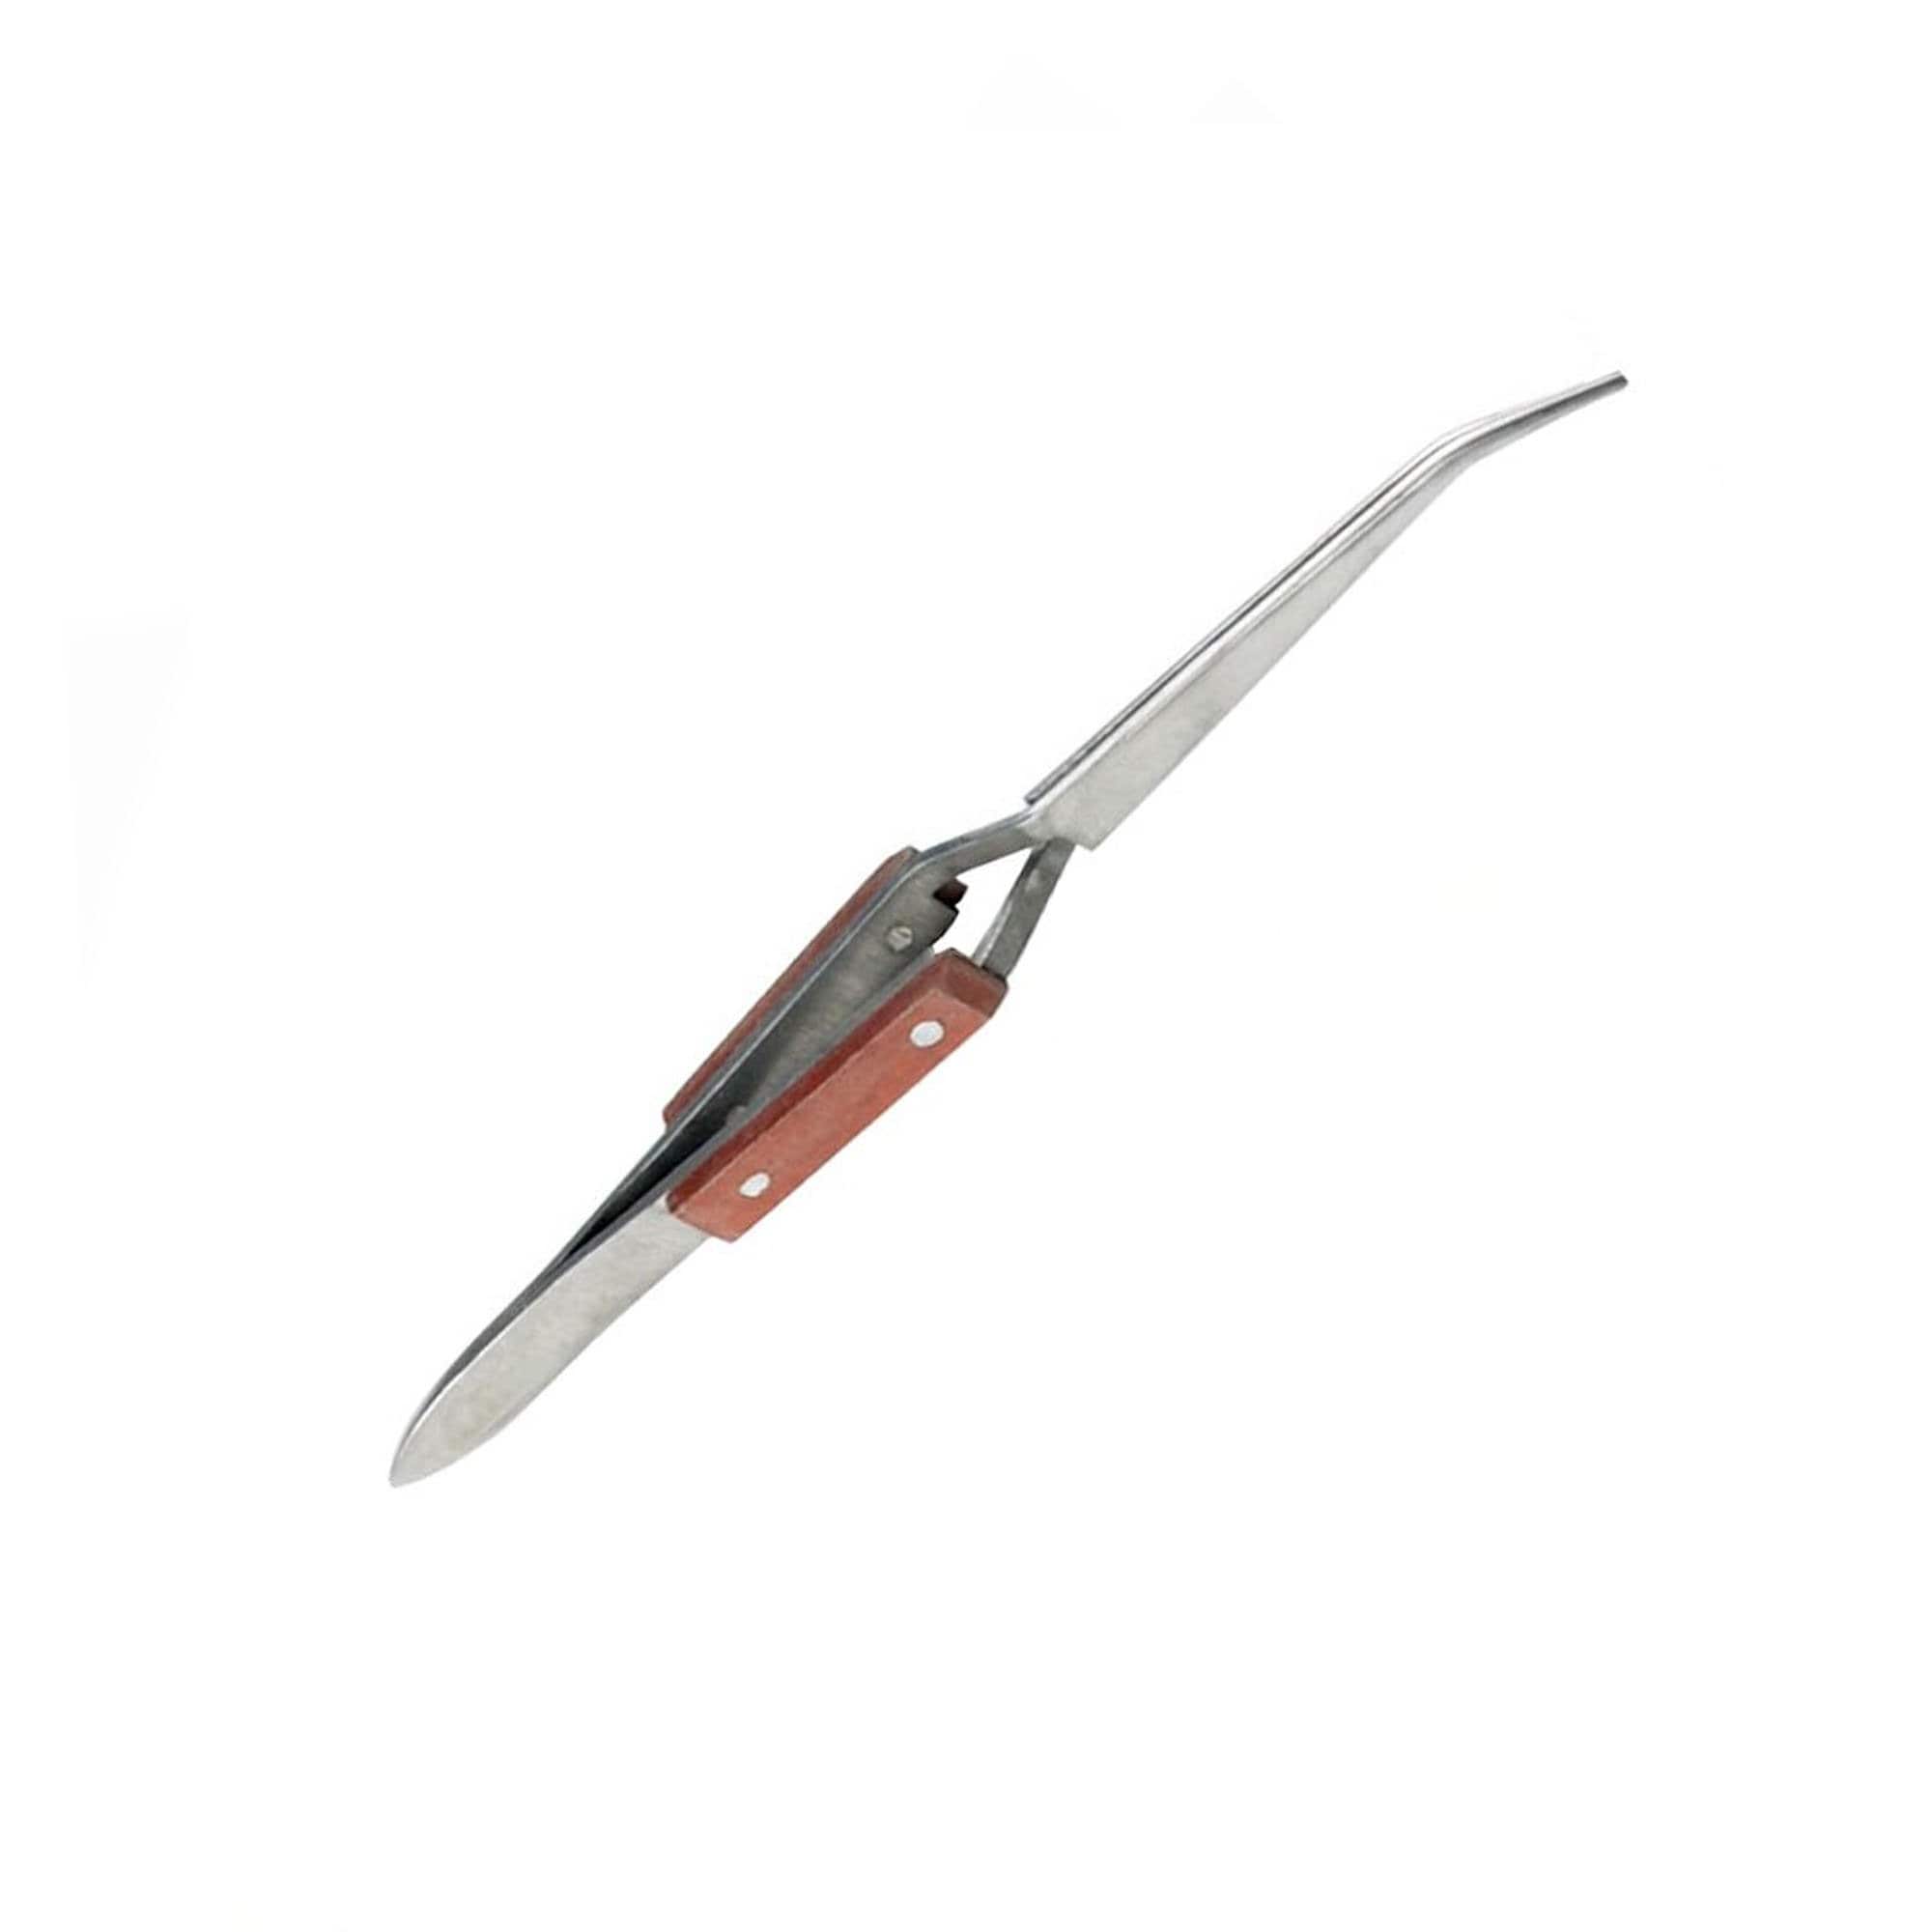 8 Inch Coated Tip Tweezers With Large Jaw Great for Larger Stones Etc. SALE  